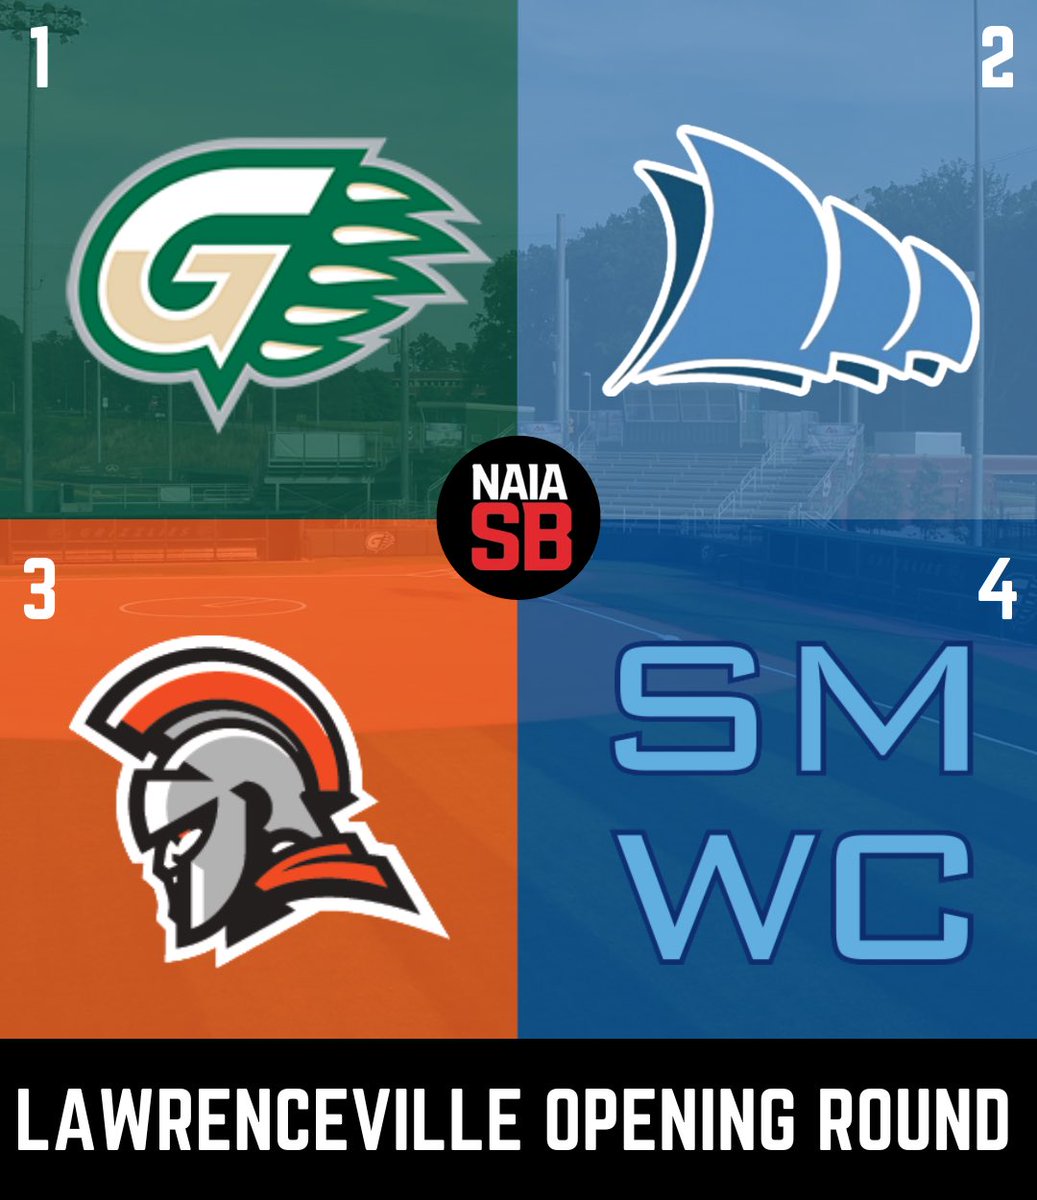 Lawrenceville opening round 🥎